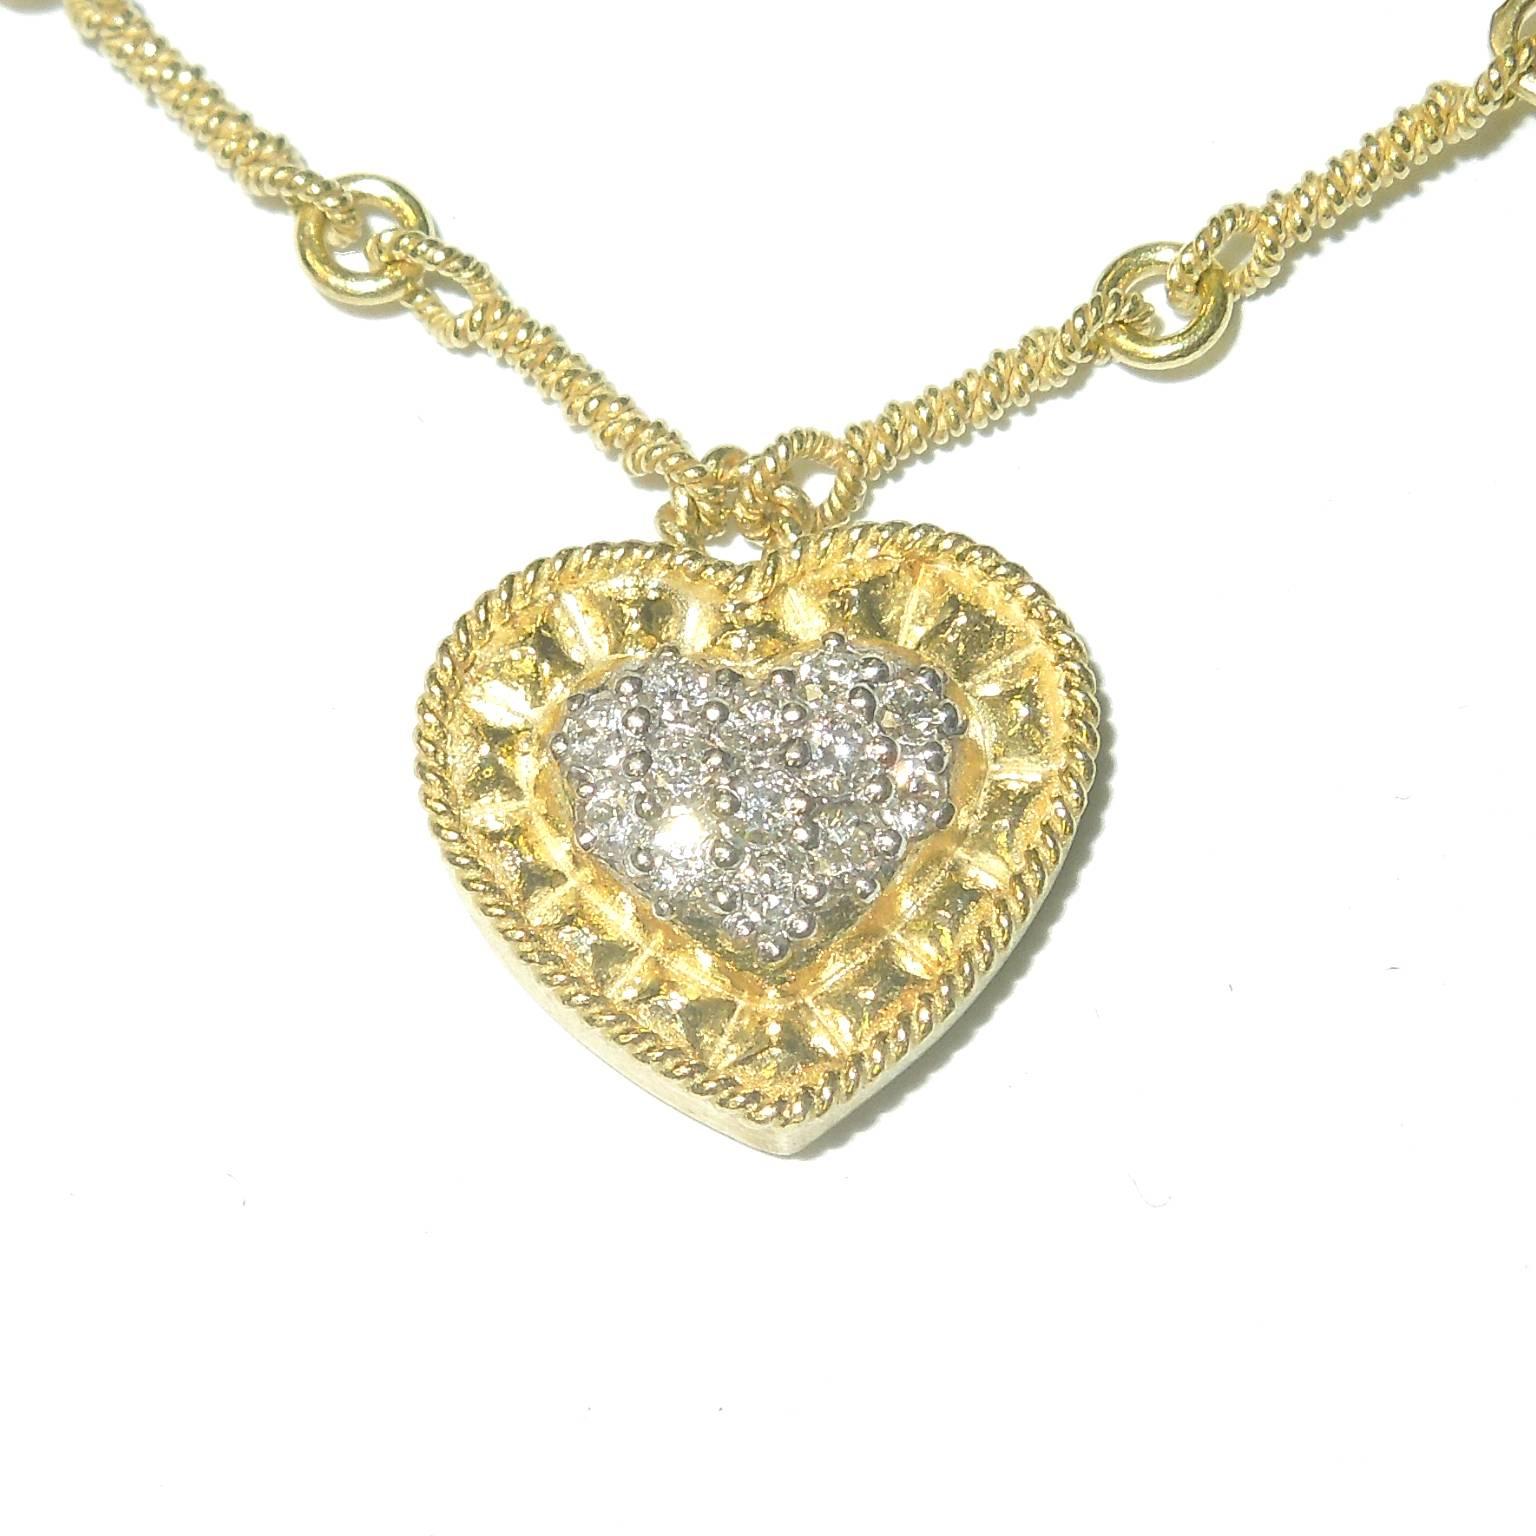 18K Gold Necklace with Handmade Chain and Double sided Diamond Bezels

Heart is attached to chain

Diamond Bezels are double sided

0.82 ct. G Color, VS Quality Diamonds

Total length 16 inches.

Signed STAMBOLIAN with our Trademark